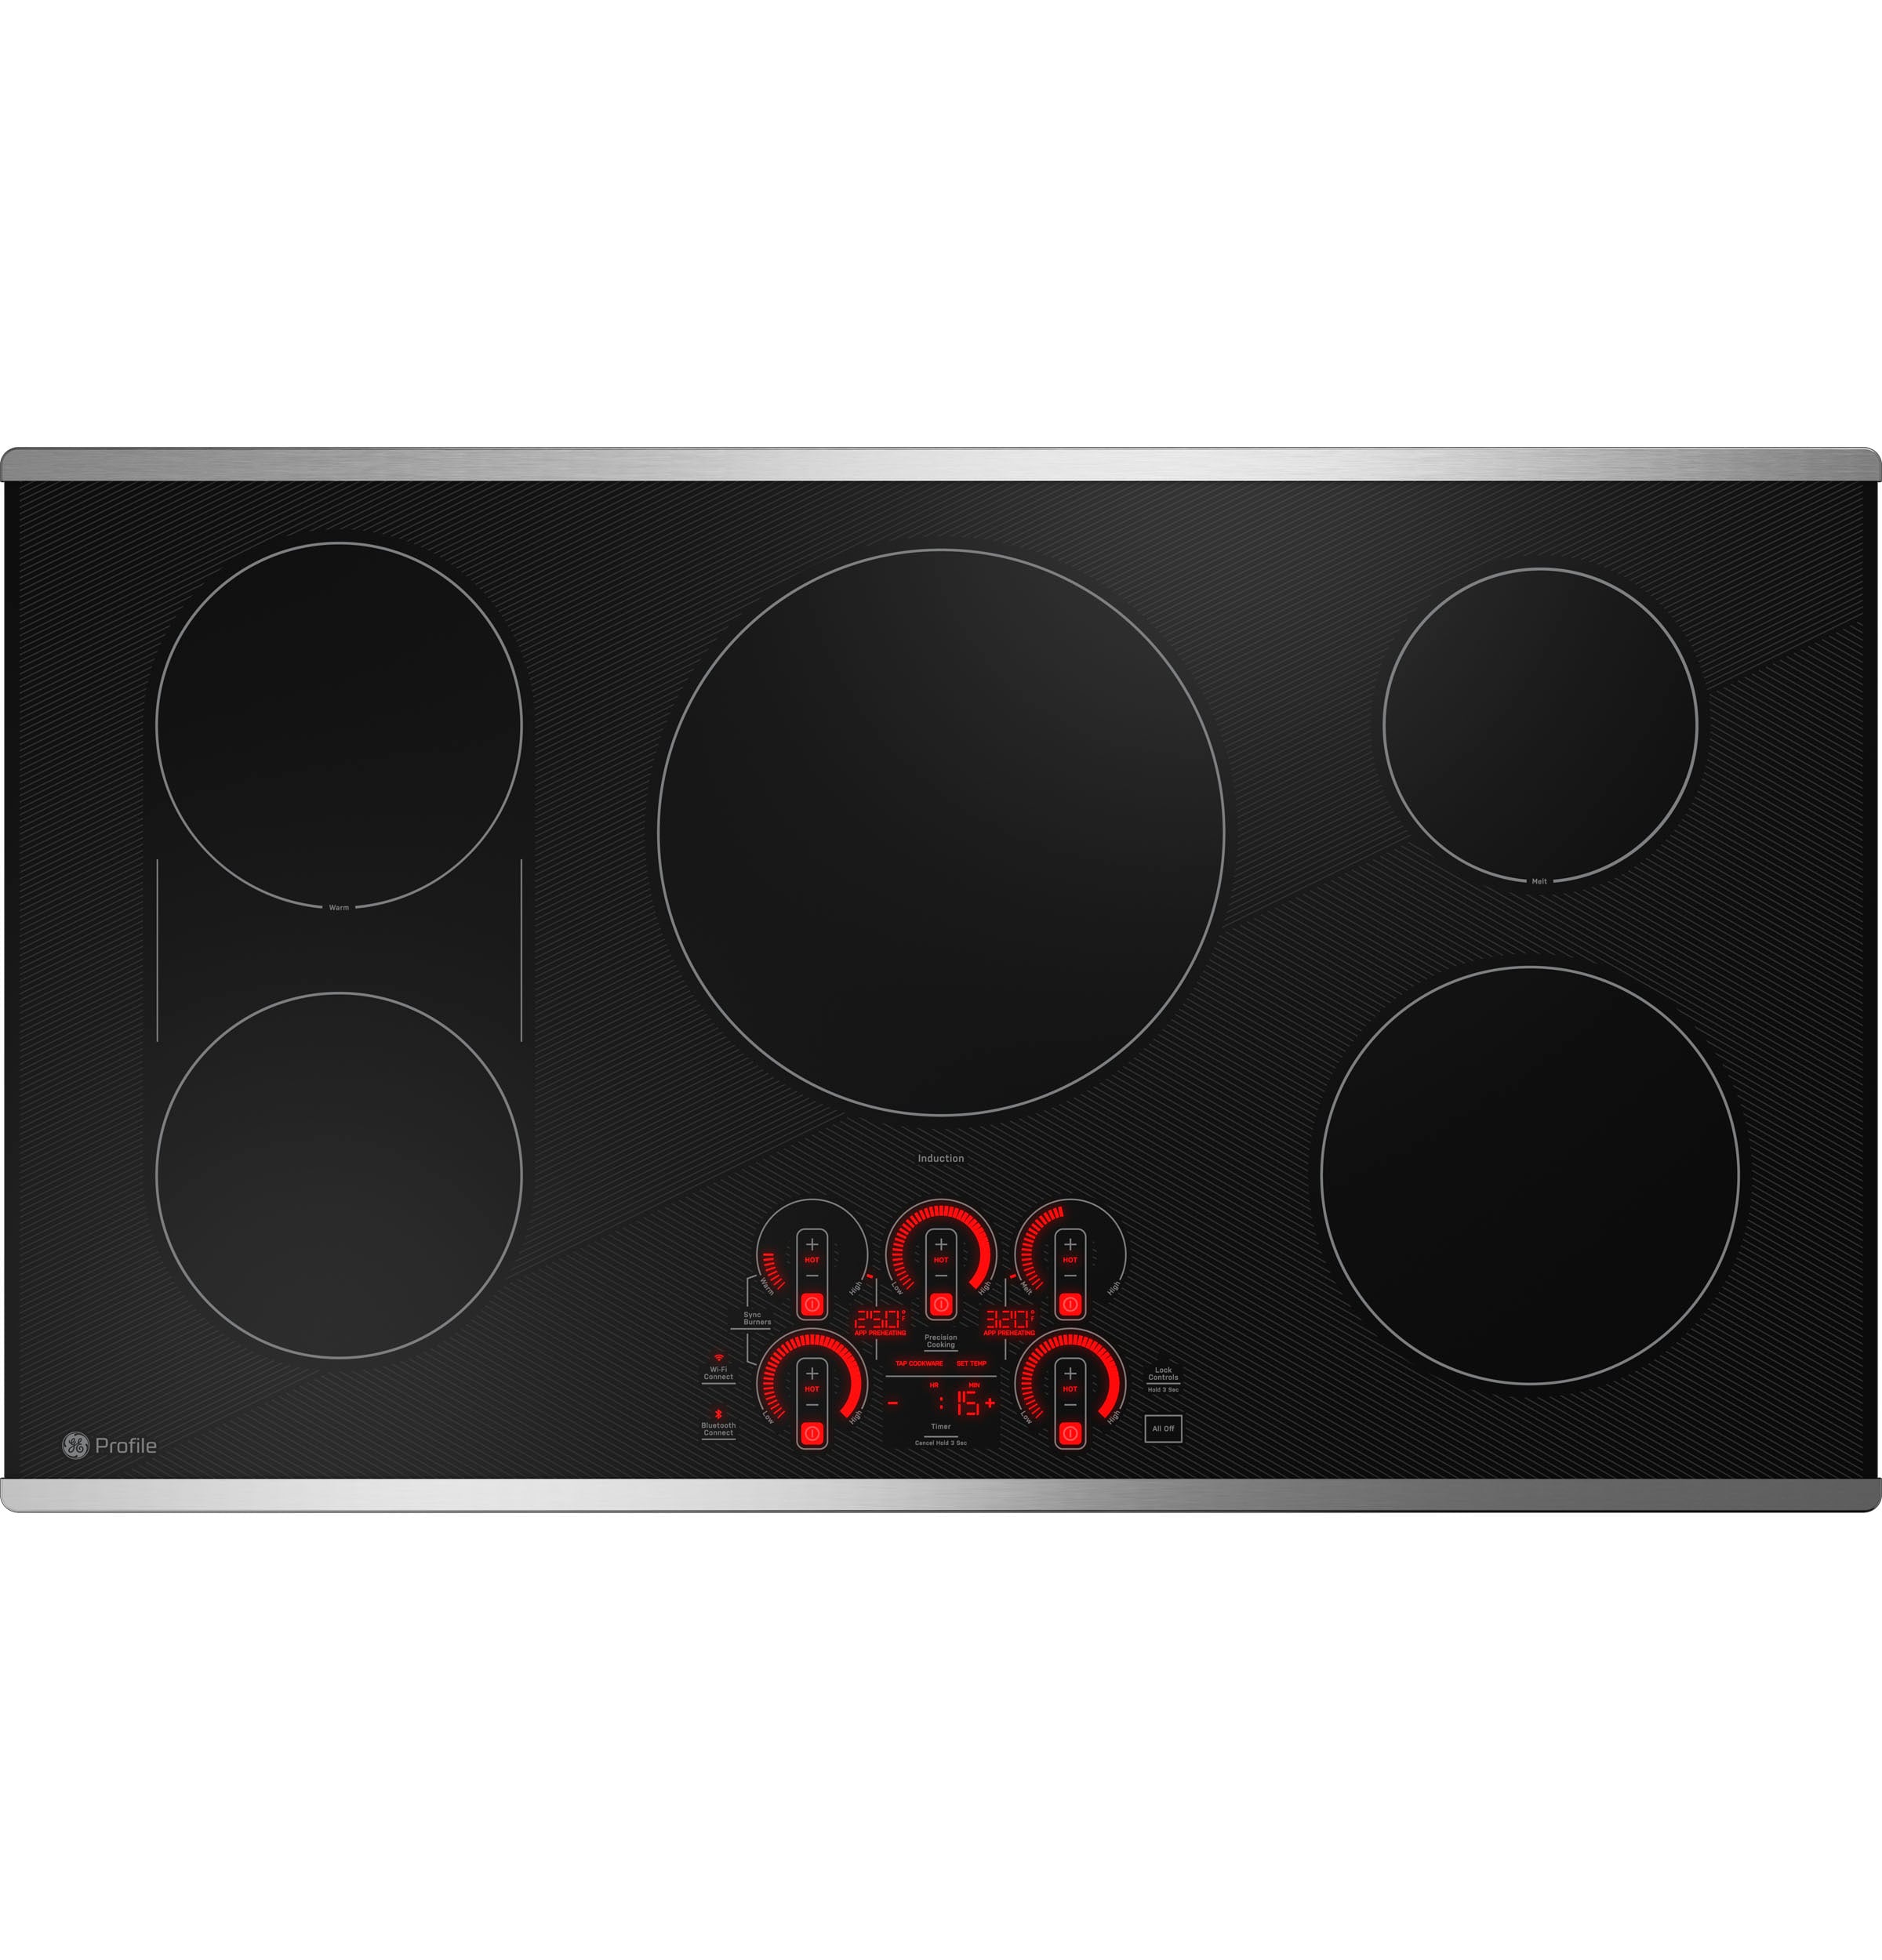 Samsung 30 Smart Induction Cooktop with Wi-Fi Black NZ30A3060UK - Best Buy